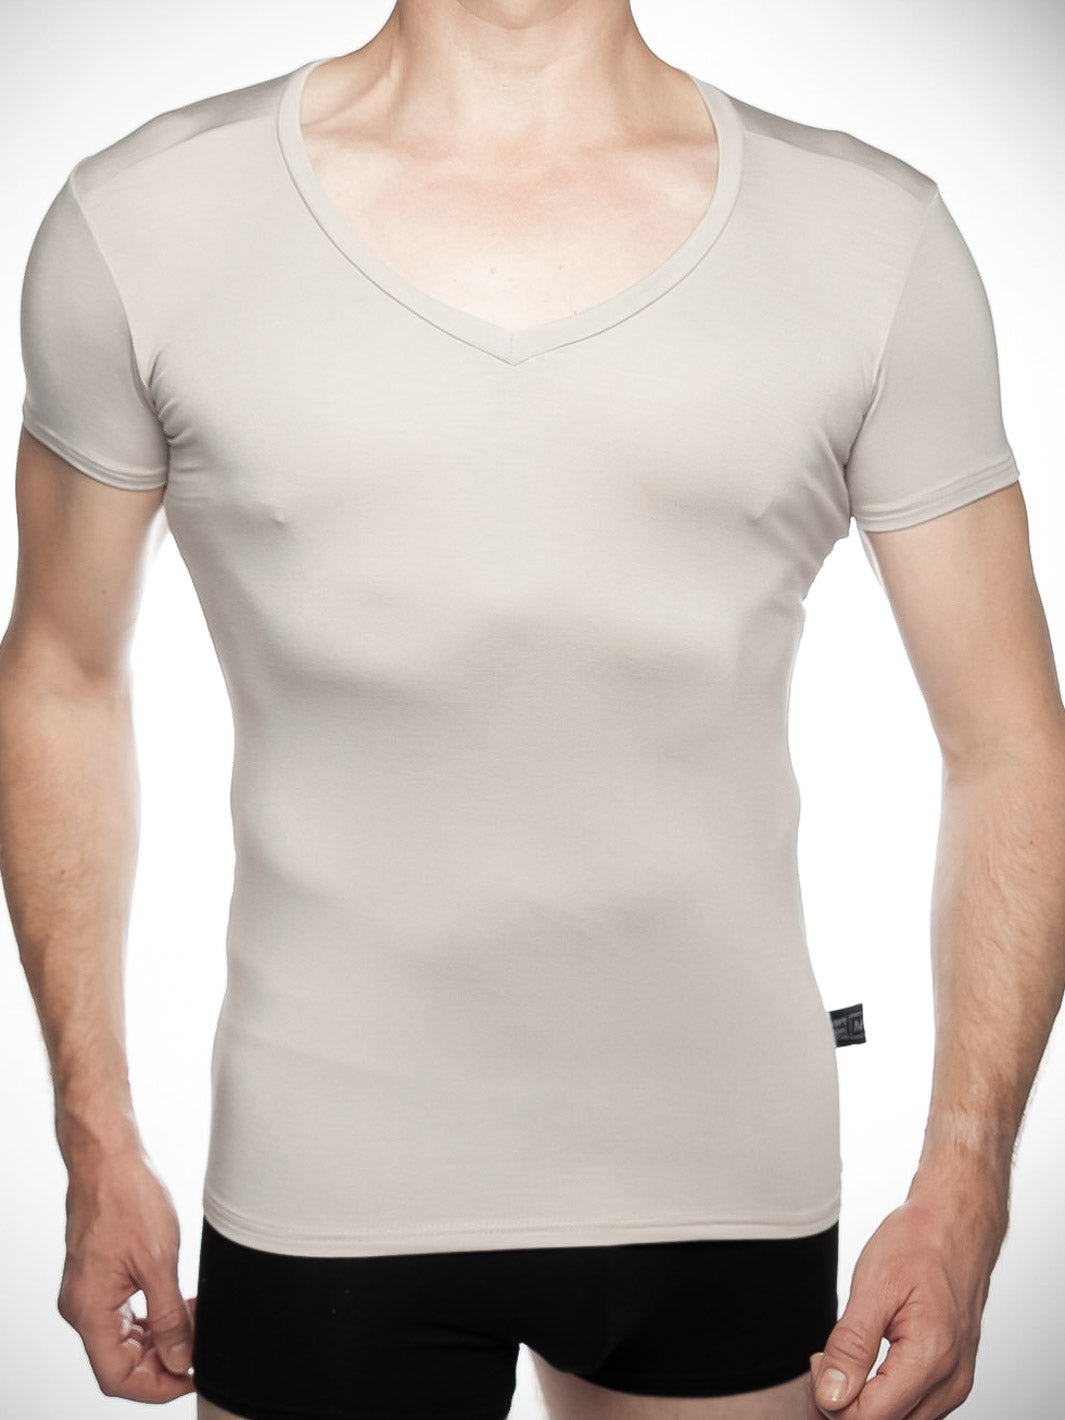 Deep v-neck undershirt in heather grey bamboo fabric - front view